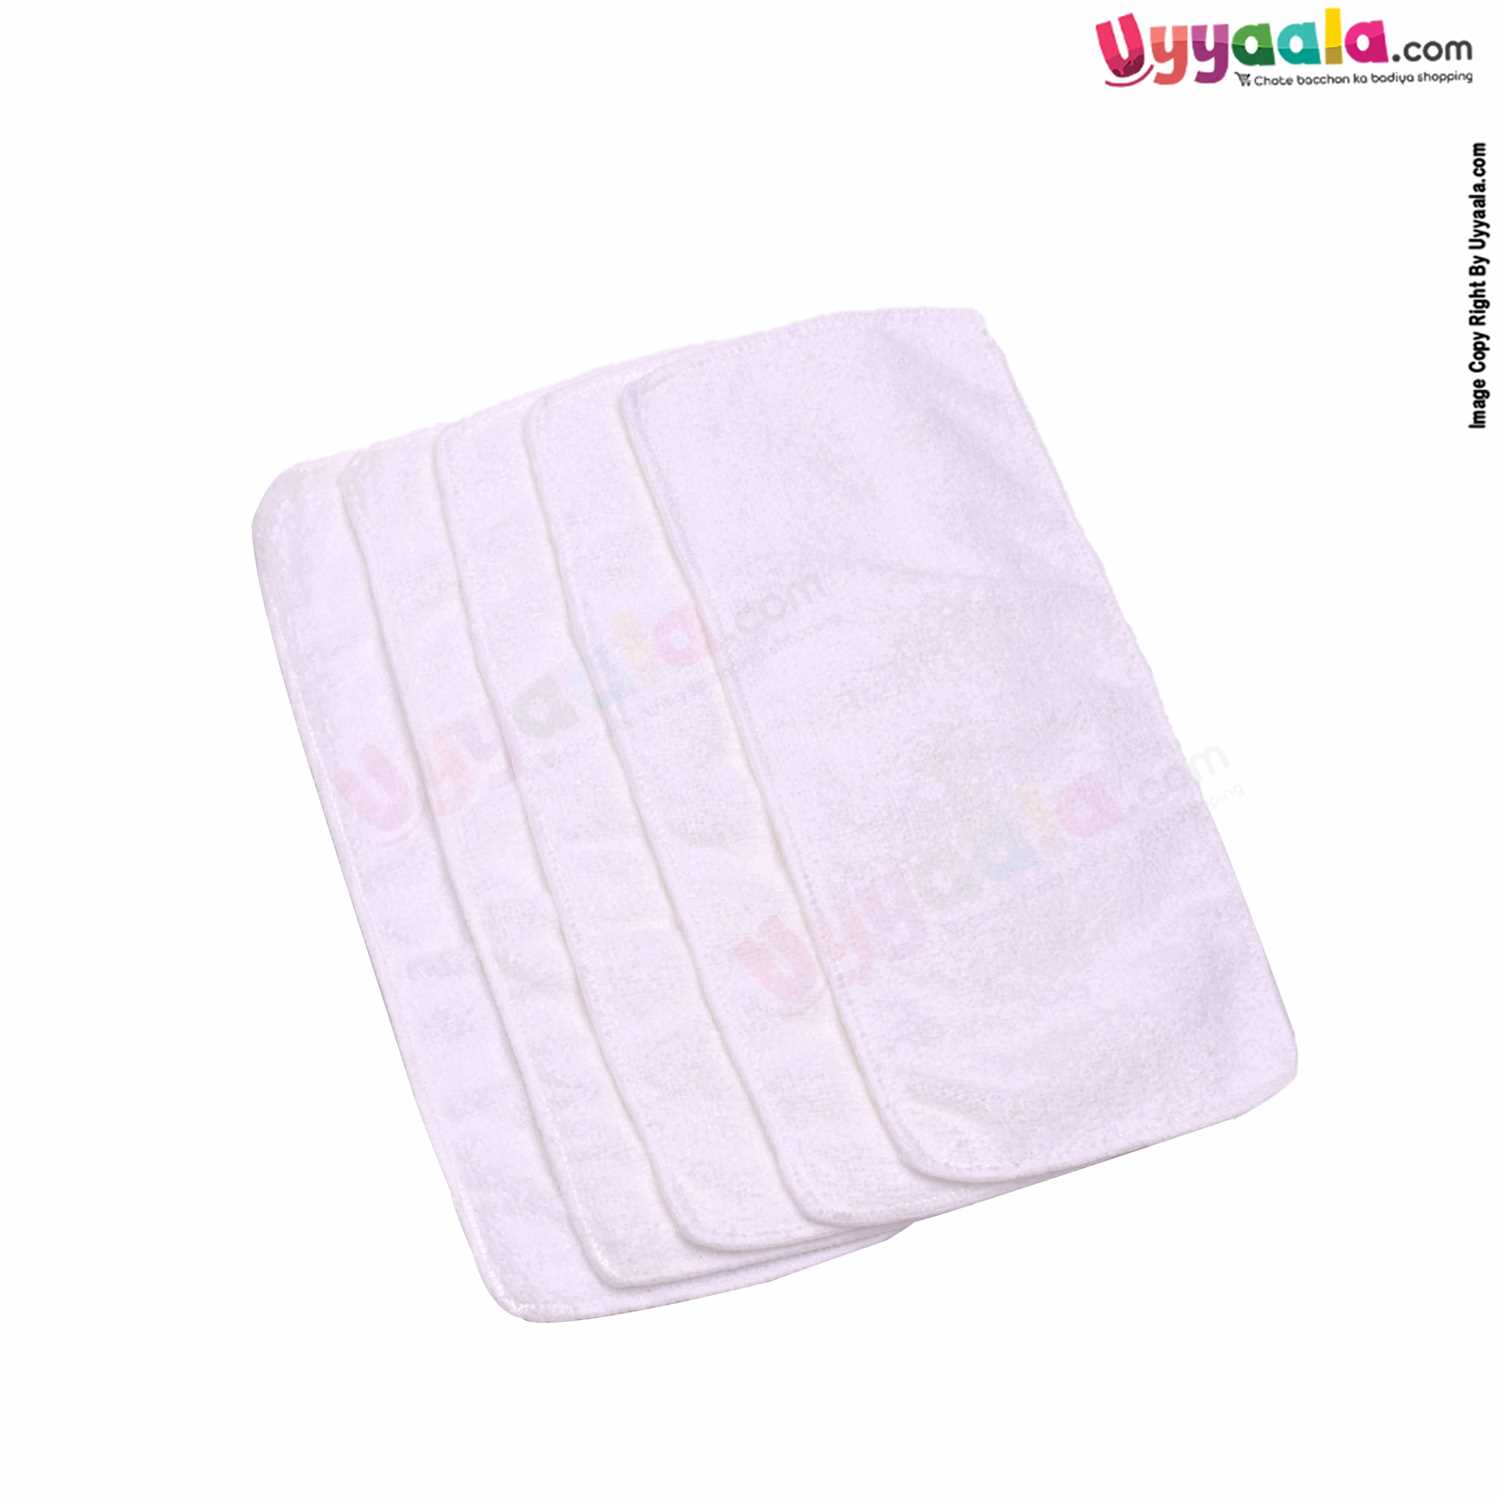 CHICCO Reusable Double Layered Nappy Pads for Babies, 5P Set - White